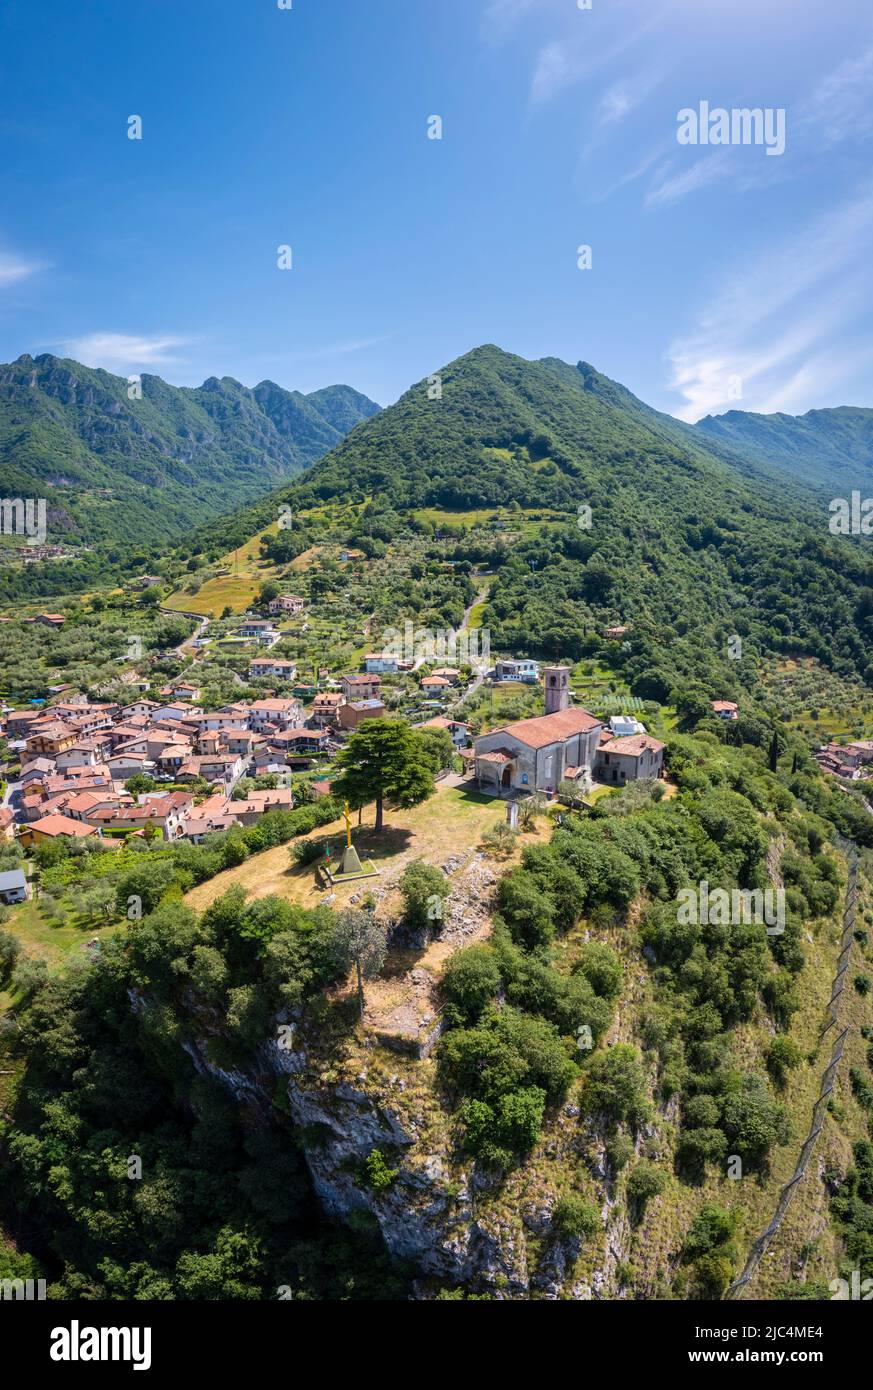 Aerial view of the Eremo di San Pietro church on a hill dominating Iseo lake, in front of Montisola. Marone, Brescia province, Lombardy, Italy, Europe. Stock Photo